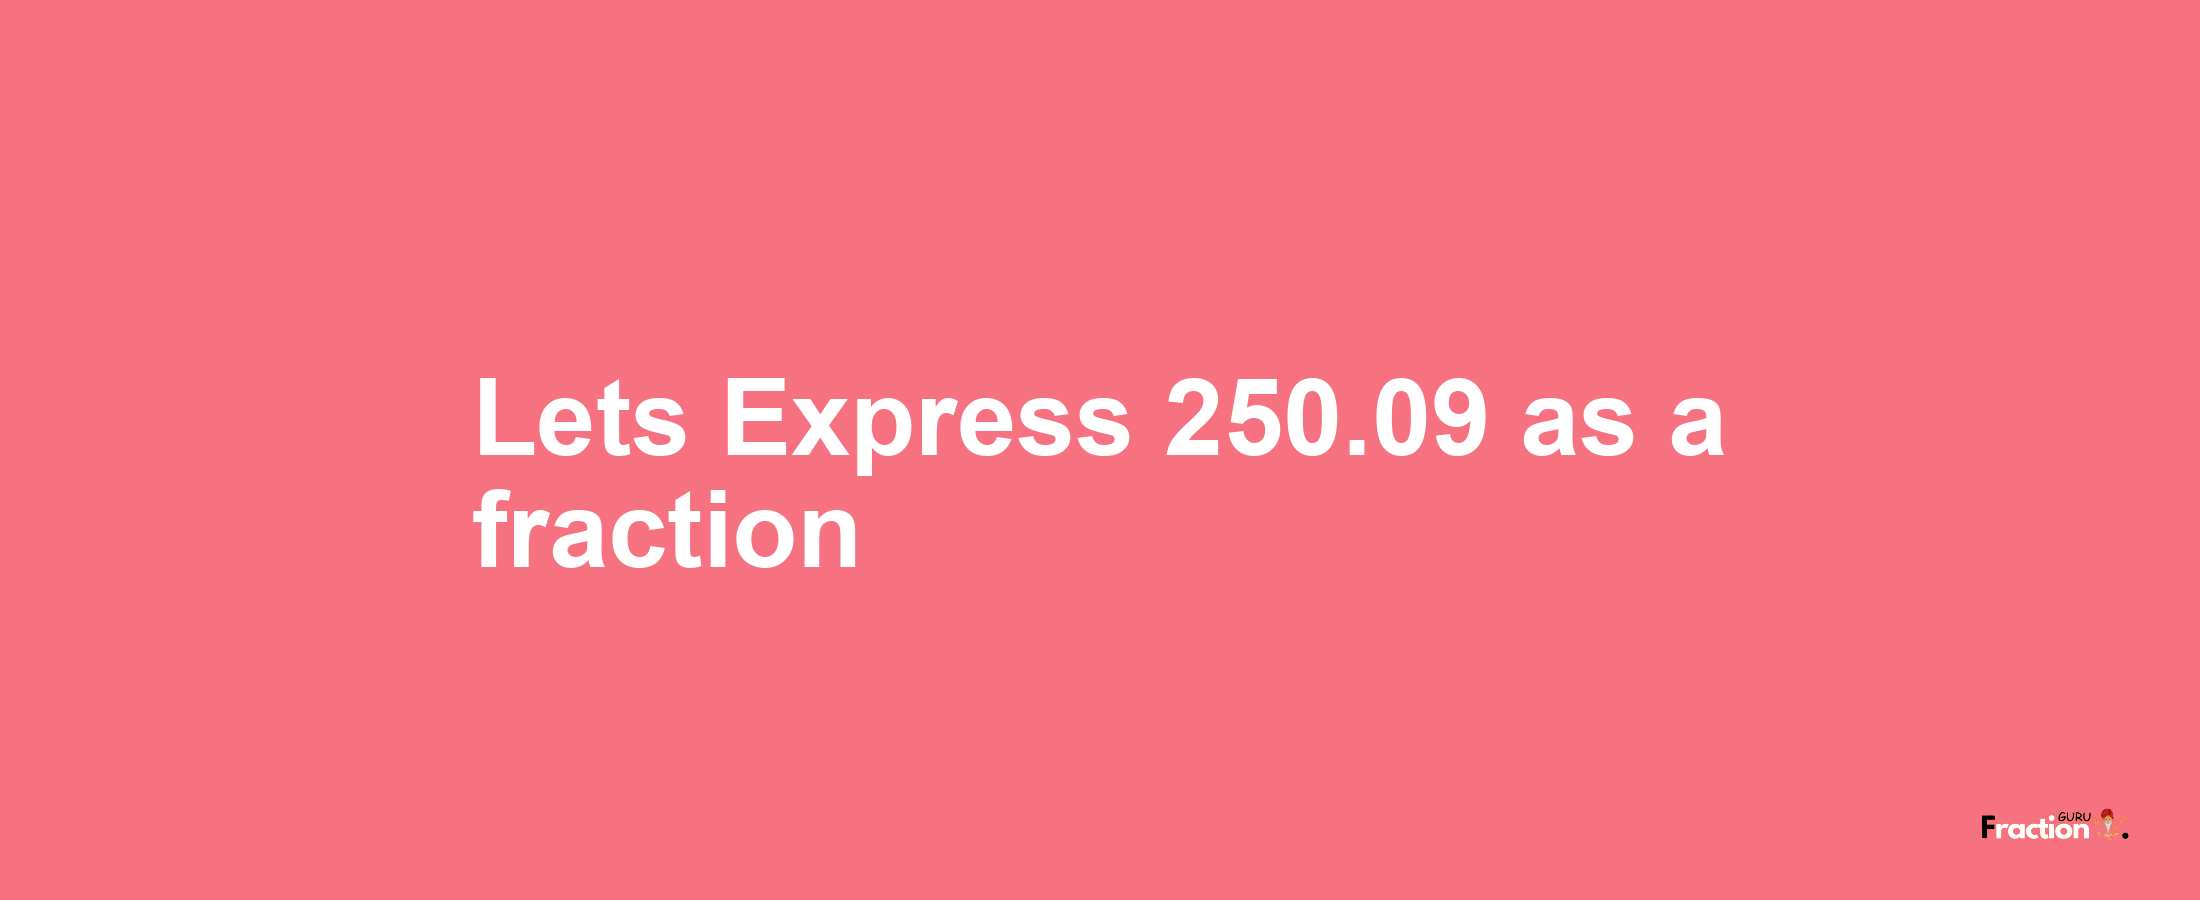 Lets Express 250.09 as afraction